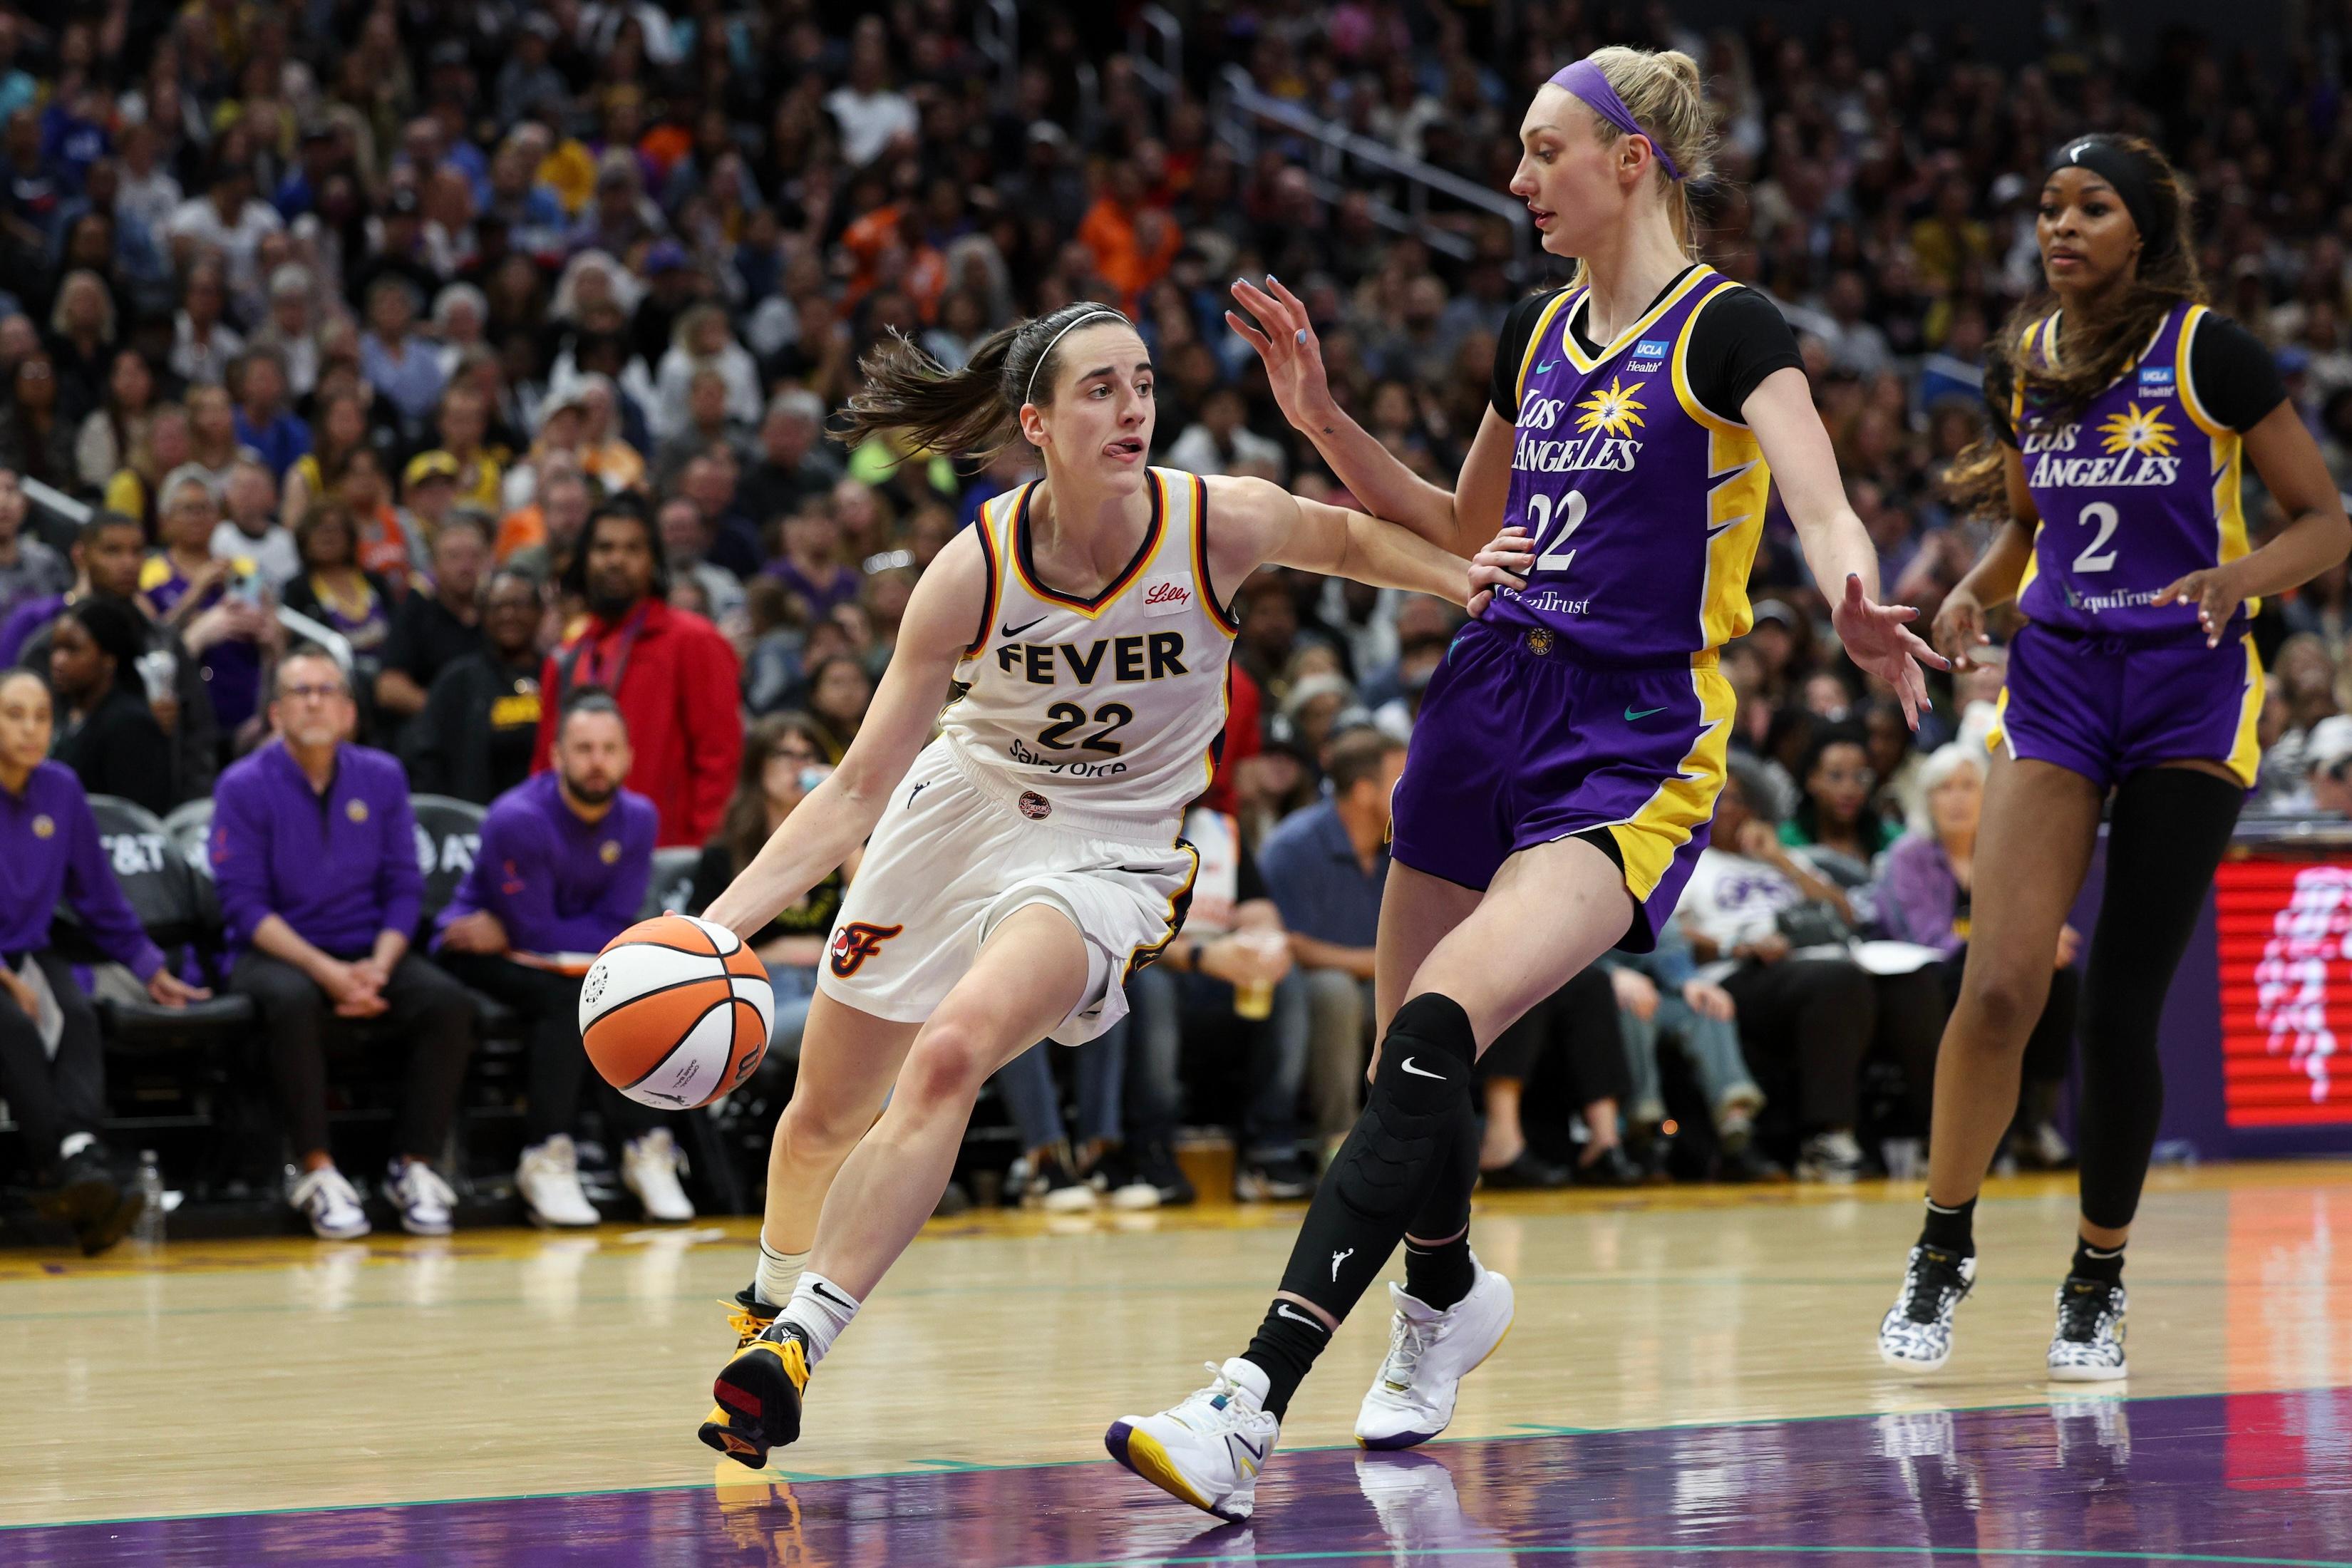 Caitlin Clark Win 1st Fever Game Over LA Sparks 78–73 in Front of 19,103